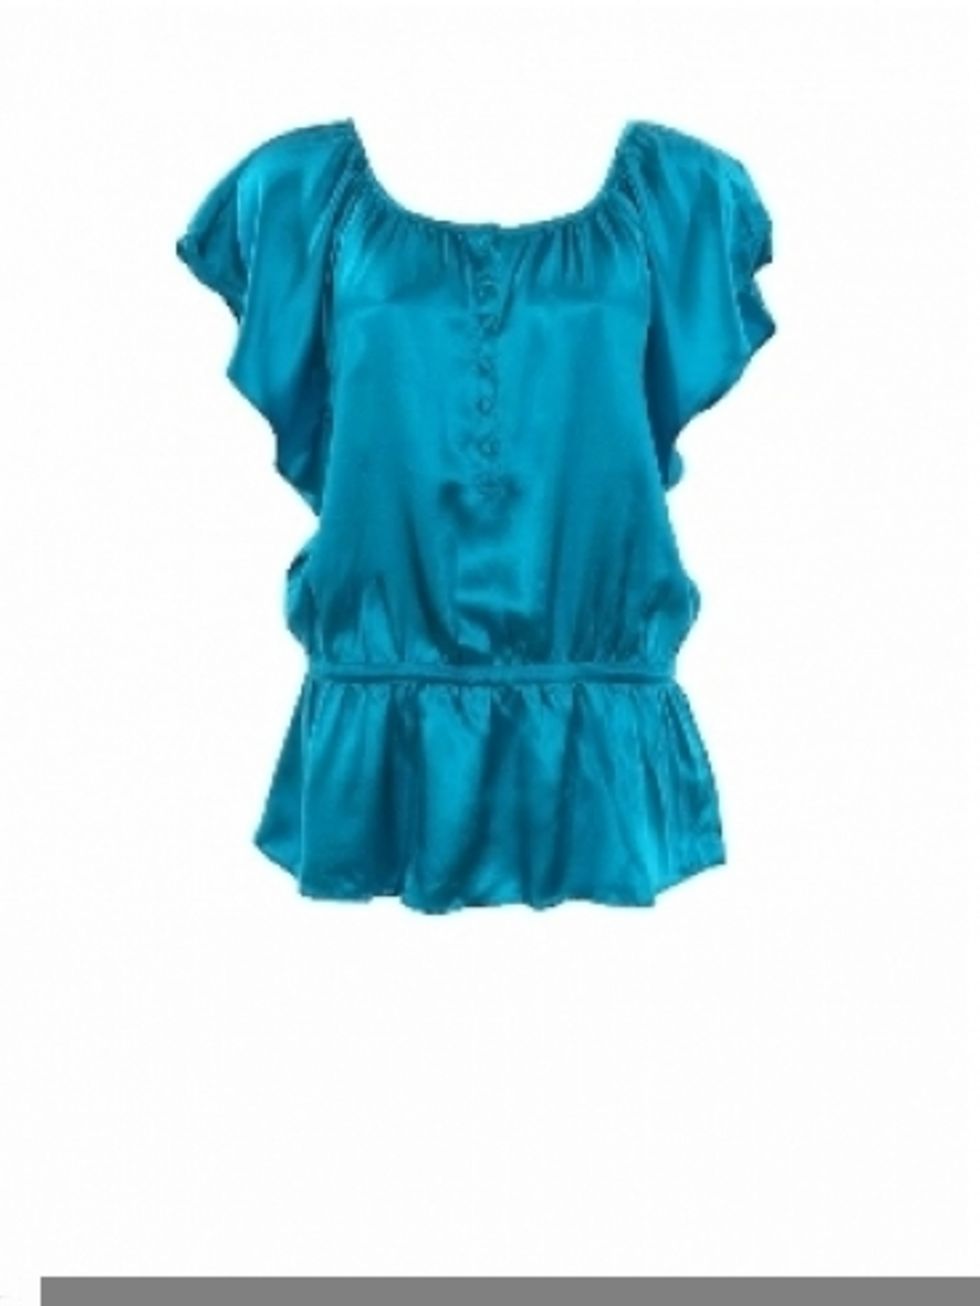 Blue, Product, Sleeve, Teal, Aqua, Baby & toddler clothing, Turquoise, Fashion, Electric blue, One-piece garment, 